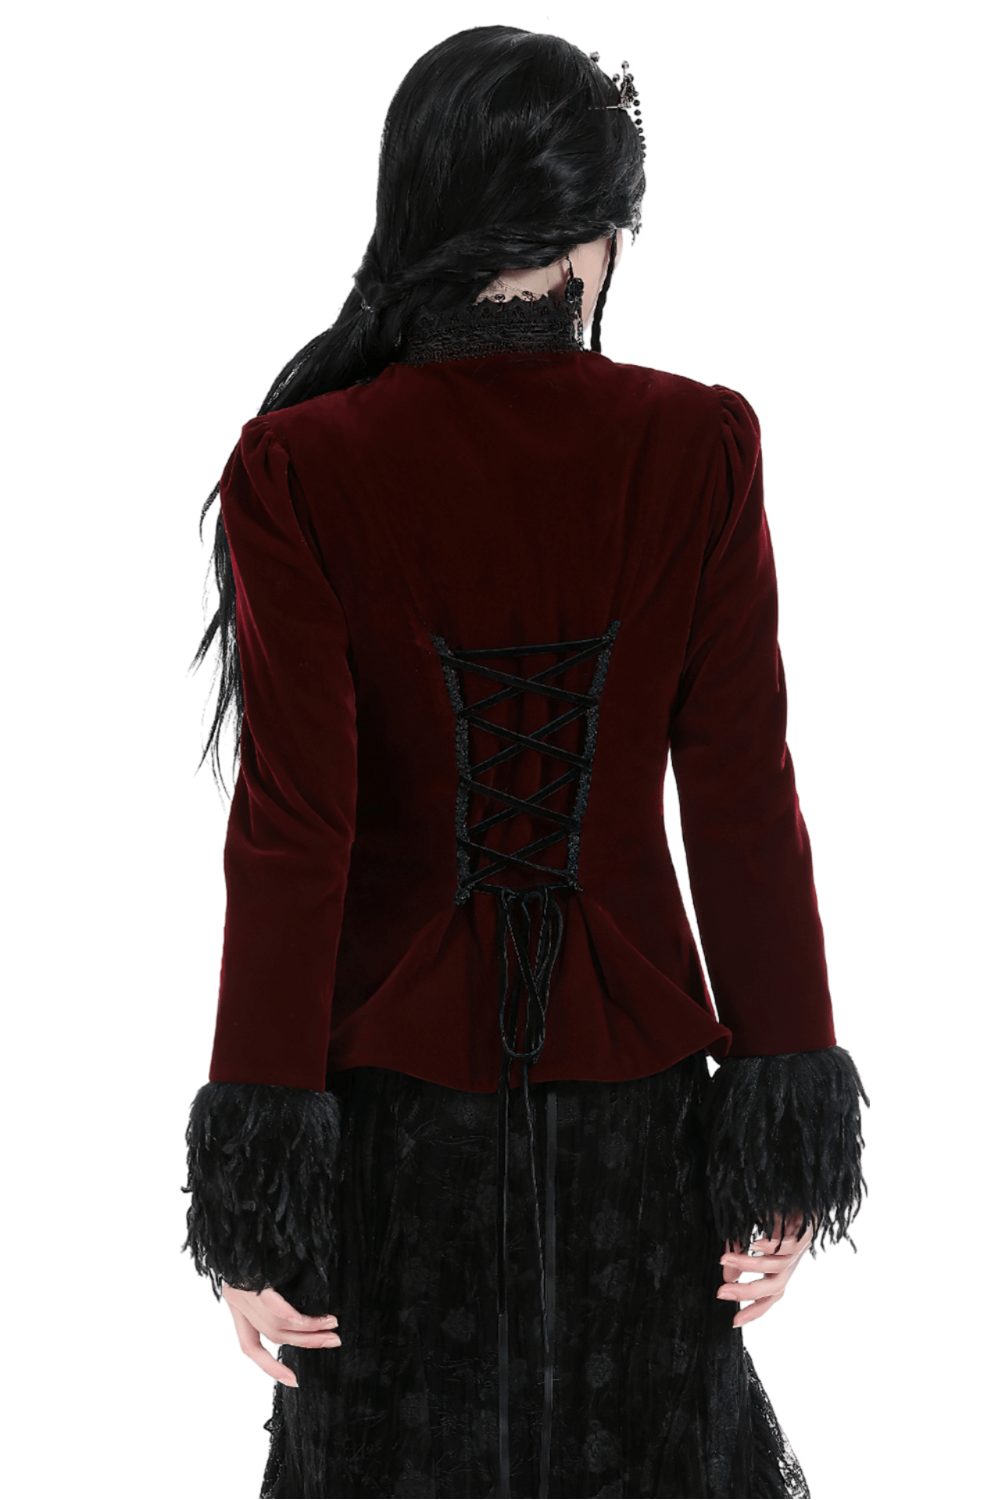 Women's Burgundy Velvet Jacket with Black Lace and Feathers